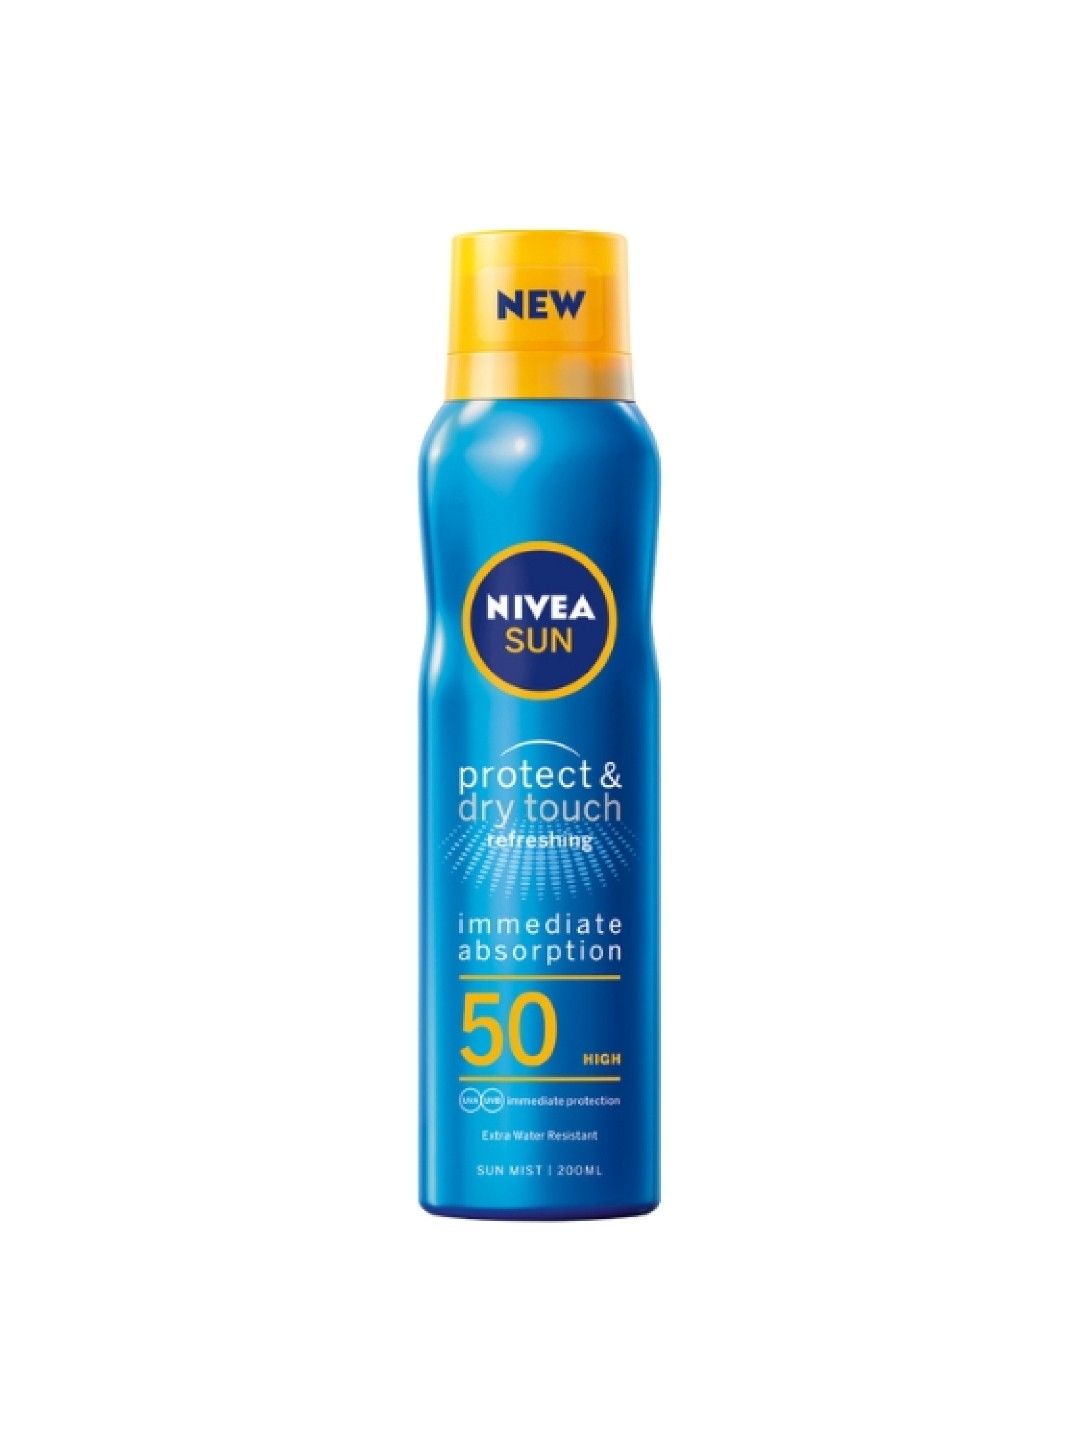 NIVEA Sun Protect & Dry Touch Refreshing Spray Sunscreen with SPF 50 (200ml)